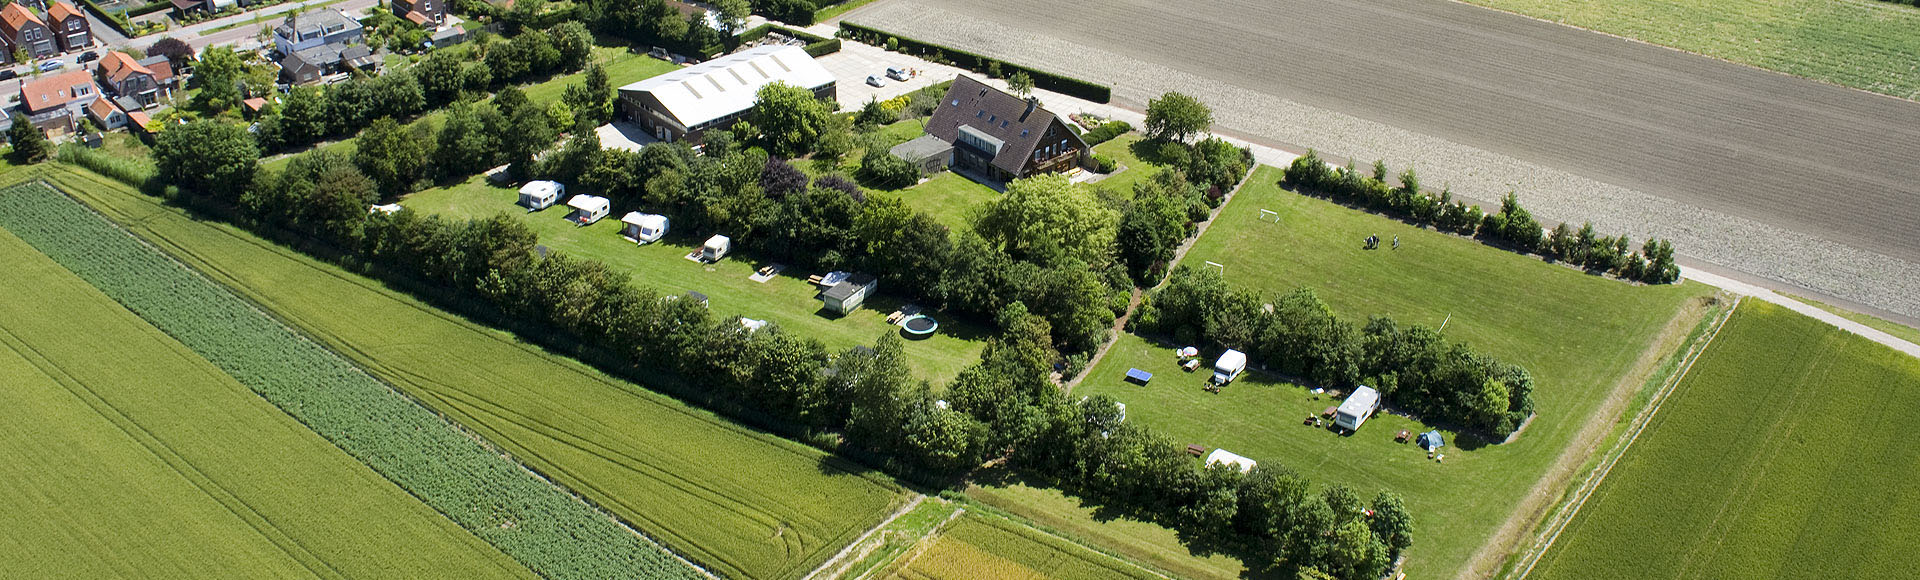 camping oostkapelle